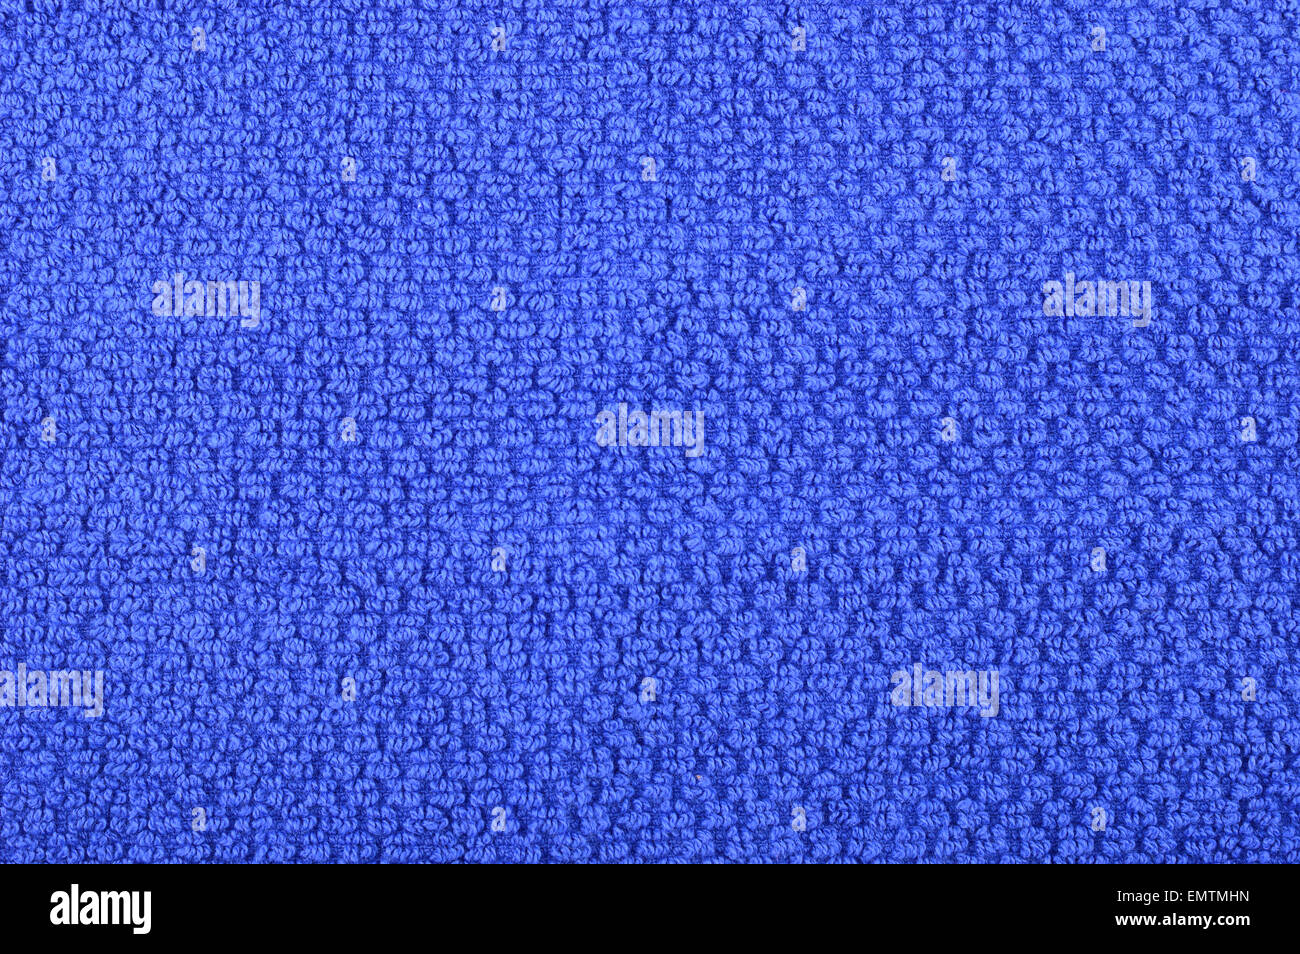 Navy blue, terry towel background texture. Copyspace. Stock Photo